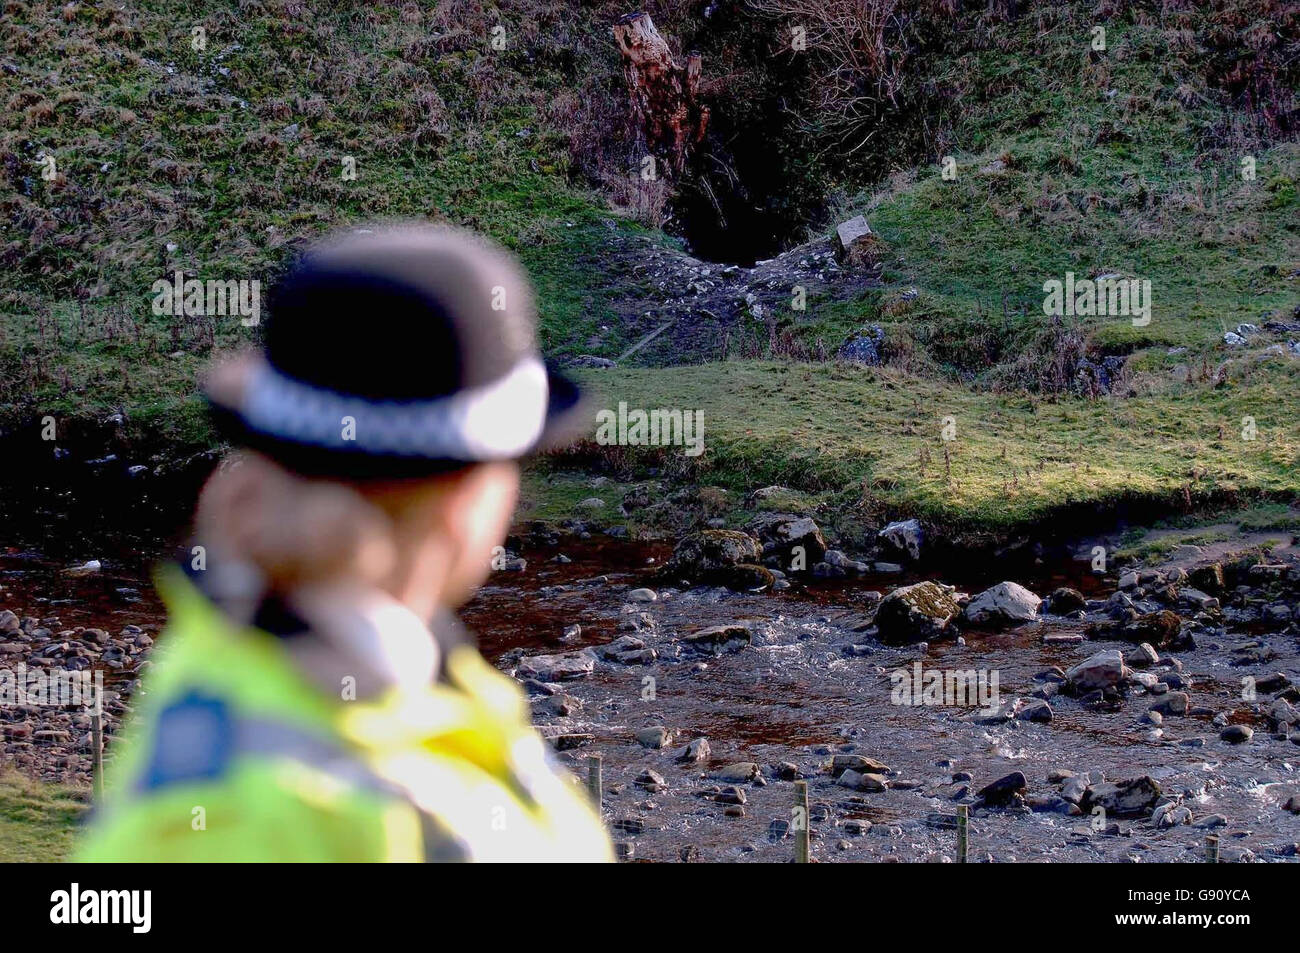 A Police Officer on duty at Manchester Hole Cave System near Pateley Bridge today Tuesday 15 November 2005. Joe Lister of Tadcaster Grammar School was killed during a School trip to the cave yesterday. See PA Sory DEATH Cave . PRESS ASSOCIATION PHOTO. Photo Credit should read John Giles/Pa Stock Photo